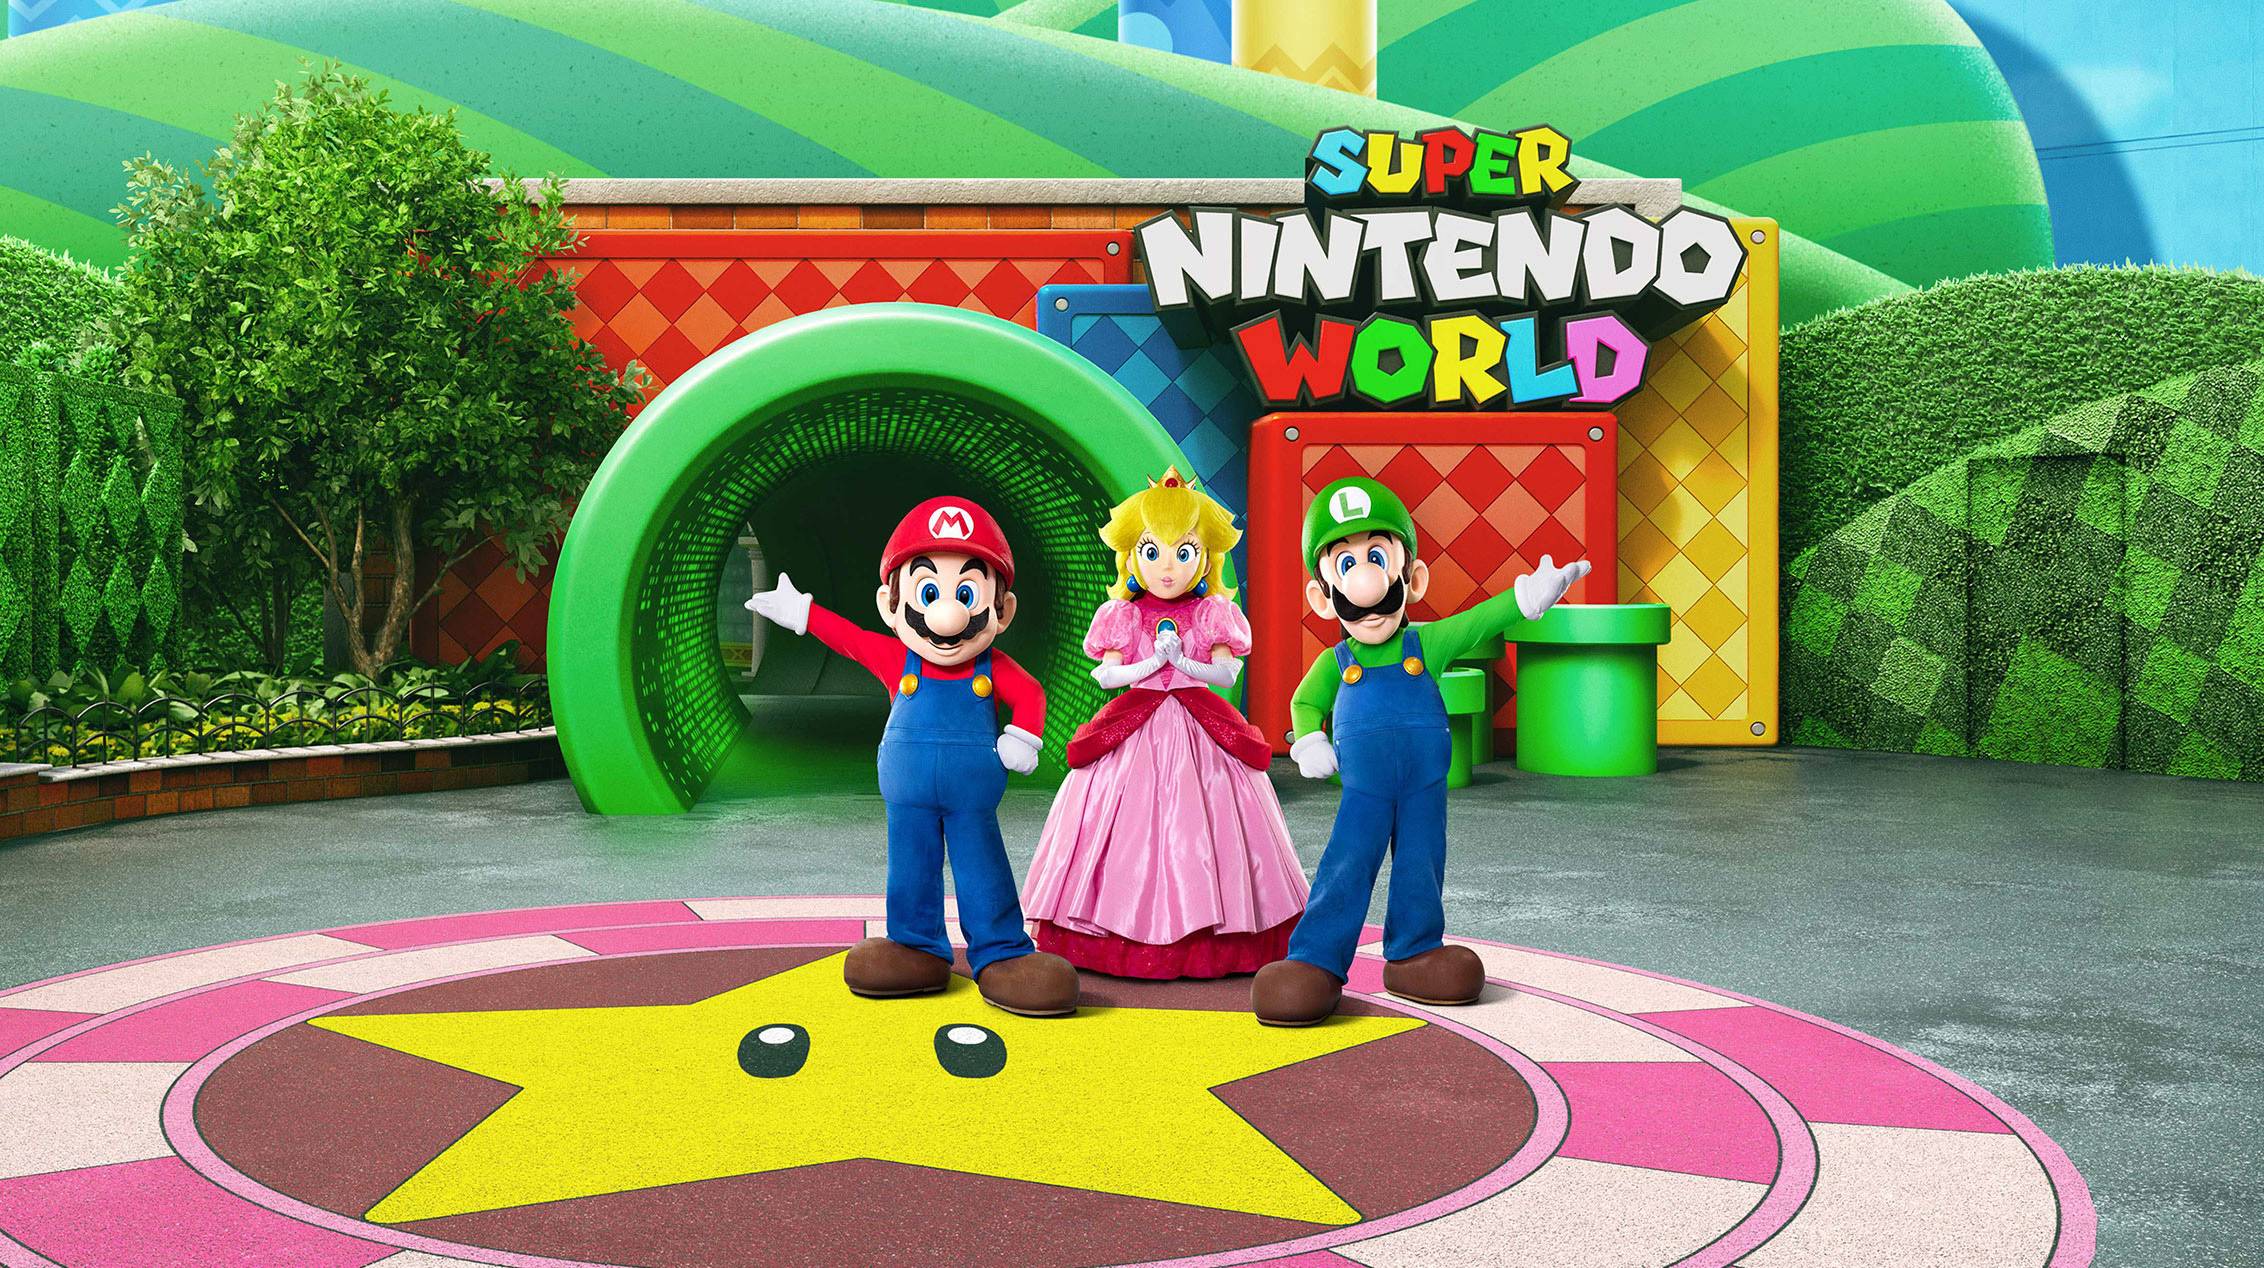 Super Nintendo World will open in February 2023 at Universal Studios Hollywood